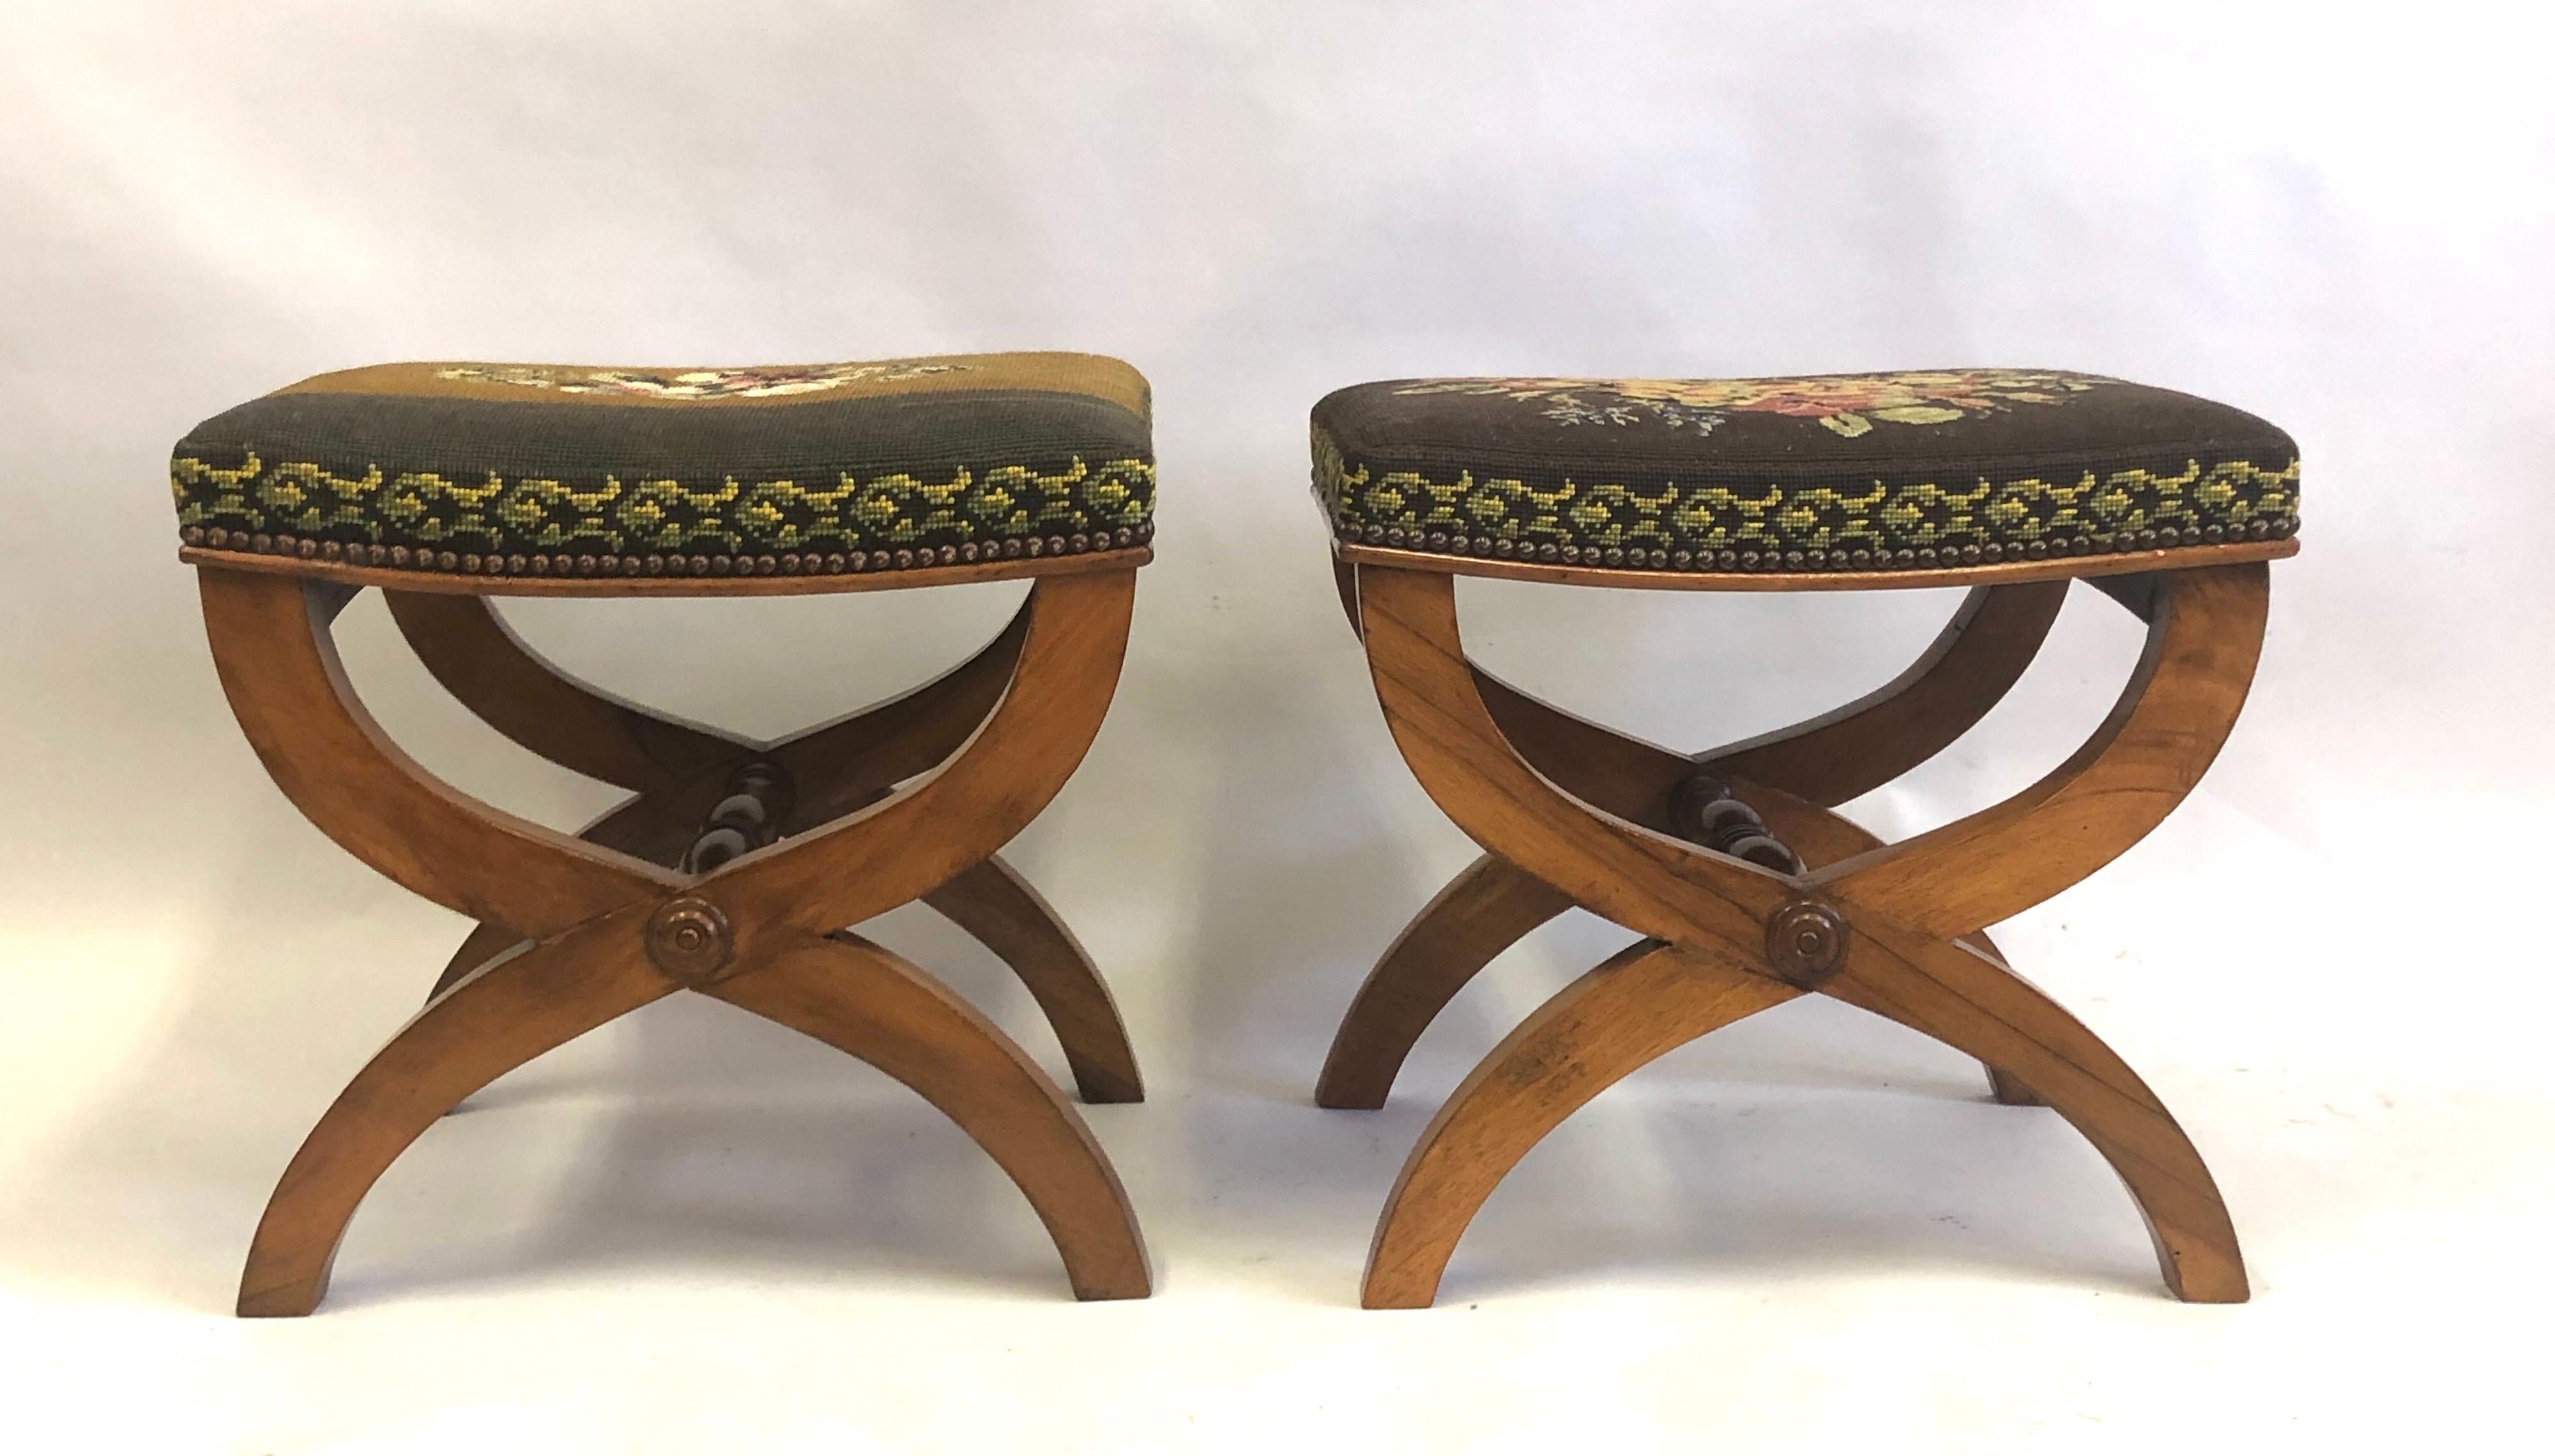 Pair of French Mid-Century Modern neoclassical benches or stools with needlepoint seats attributed to Andre Arbus. The benches are in the curile form with and an X-frame leg structure.